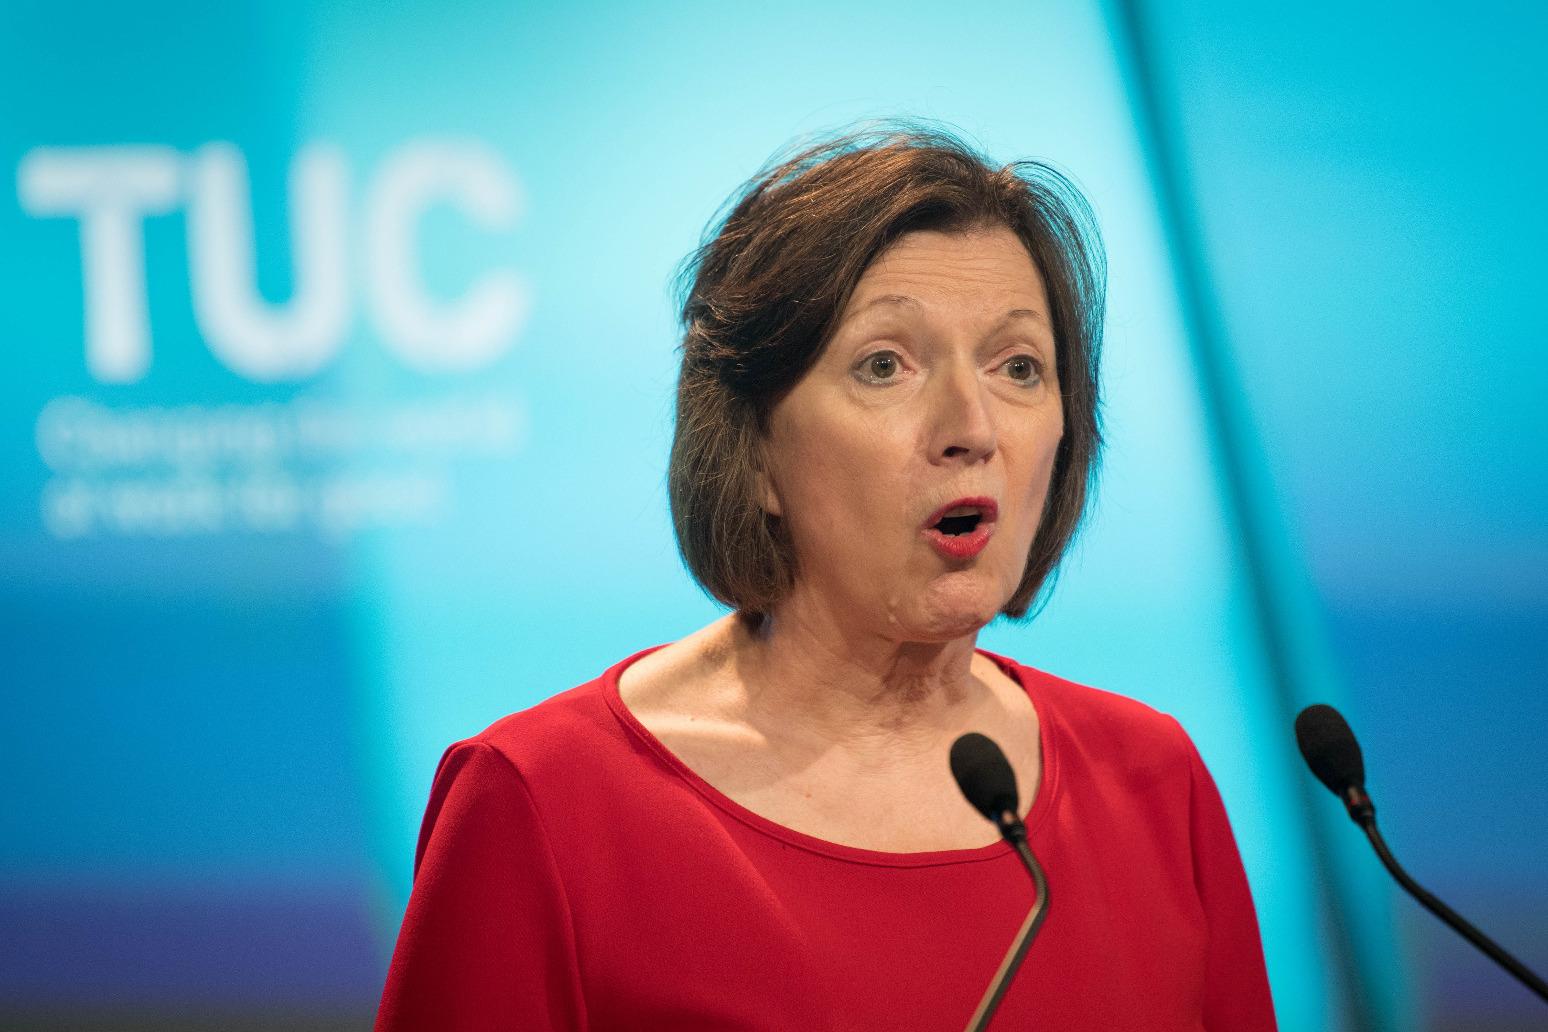 TUC new year message urges pay rise for workers 